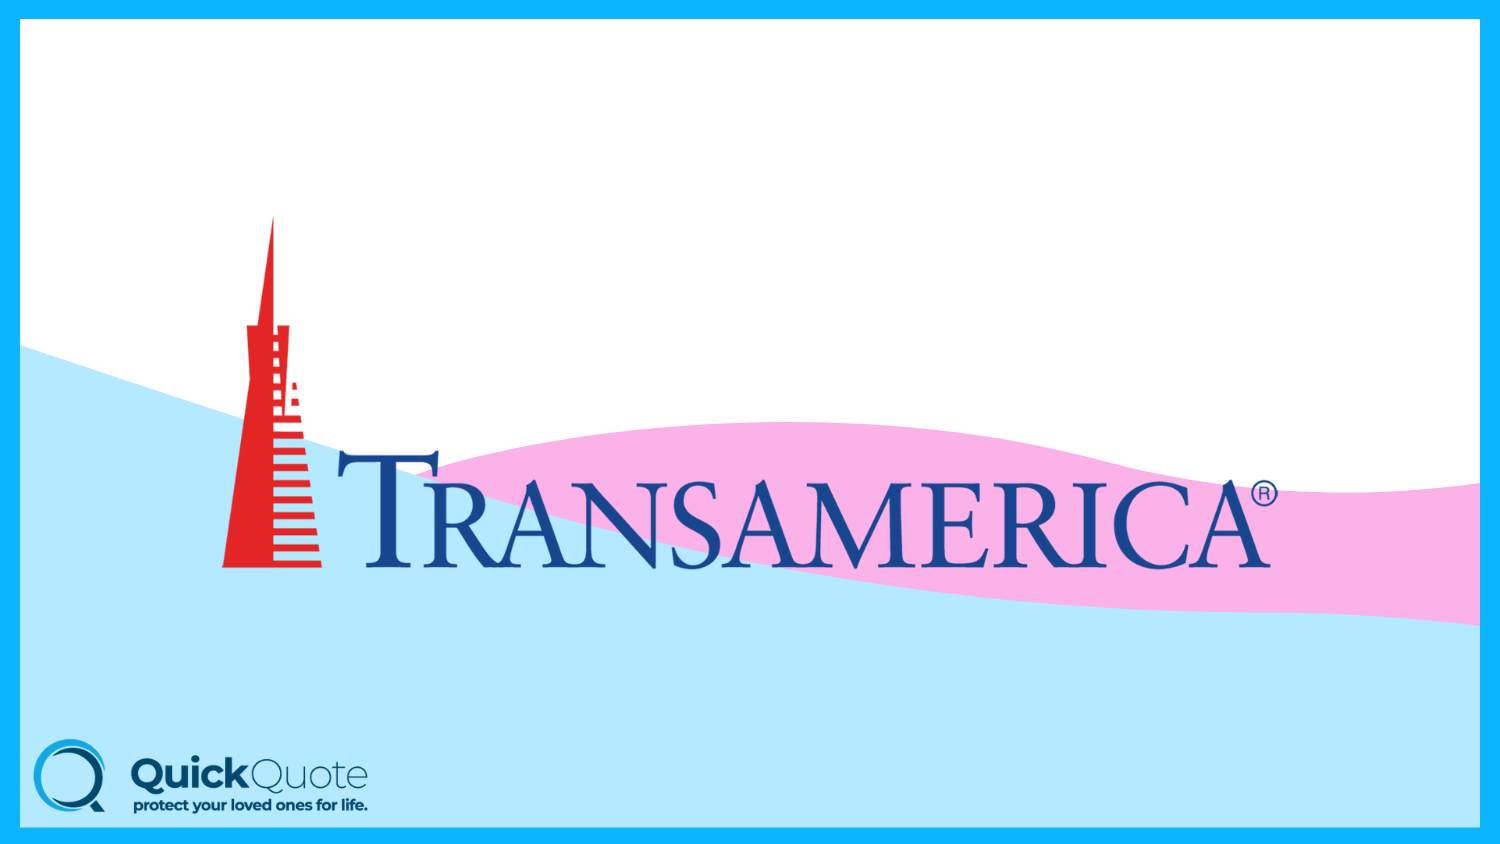 Cheap Life Insurance Without Medical Exams: Transamerica